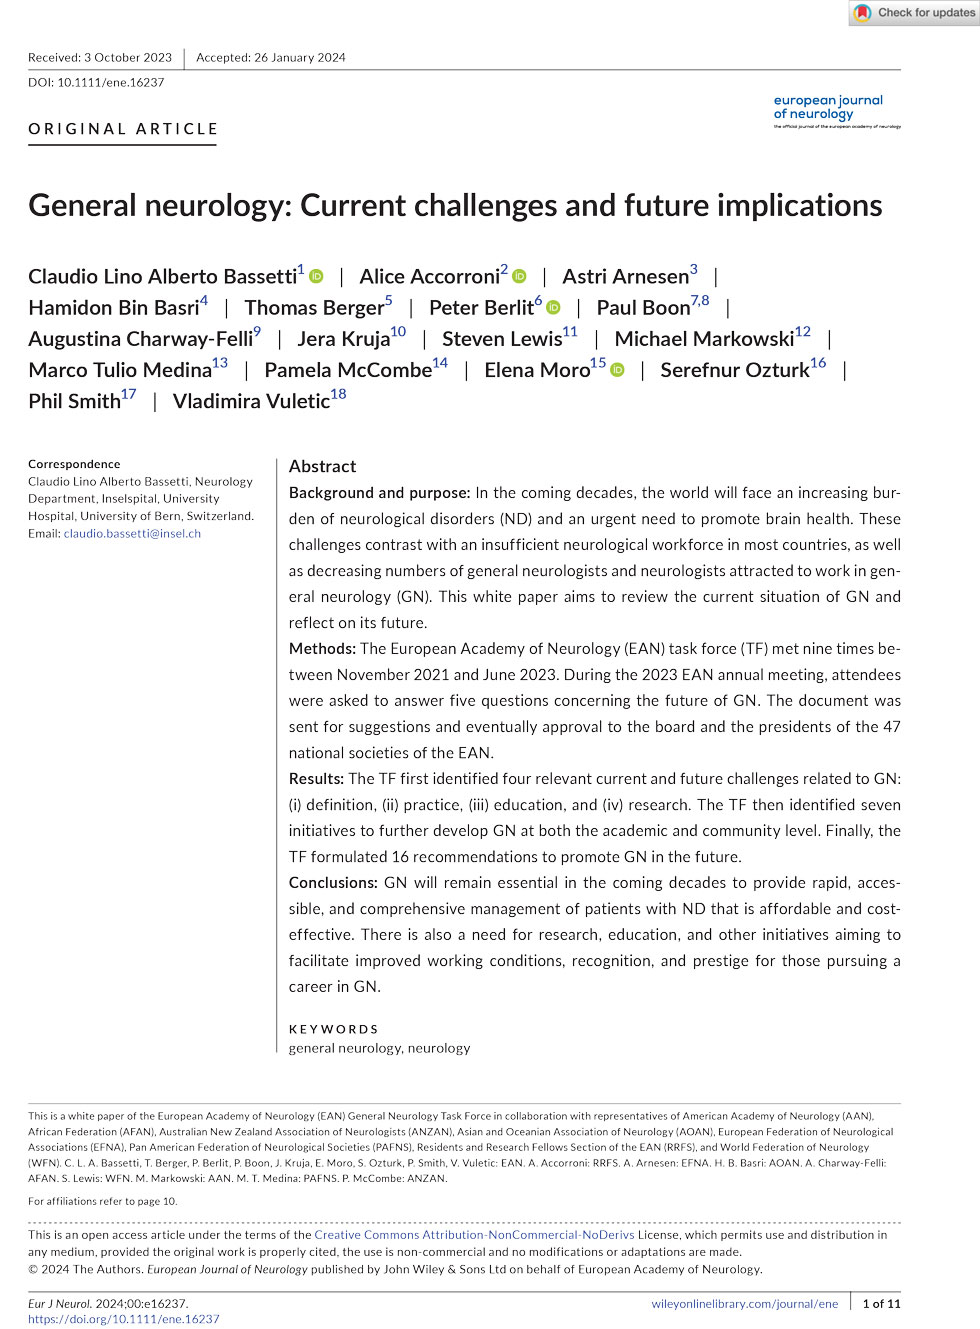 Euro J of Neurology 2024 General neurology Current challenges and future implications